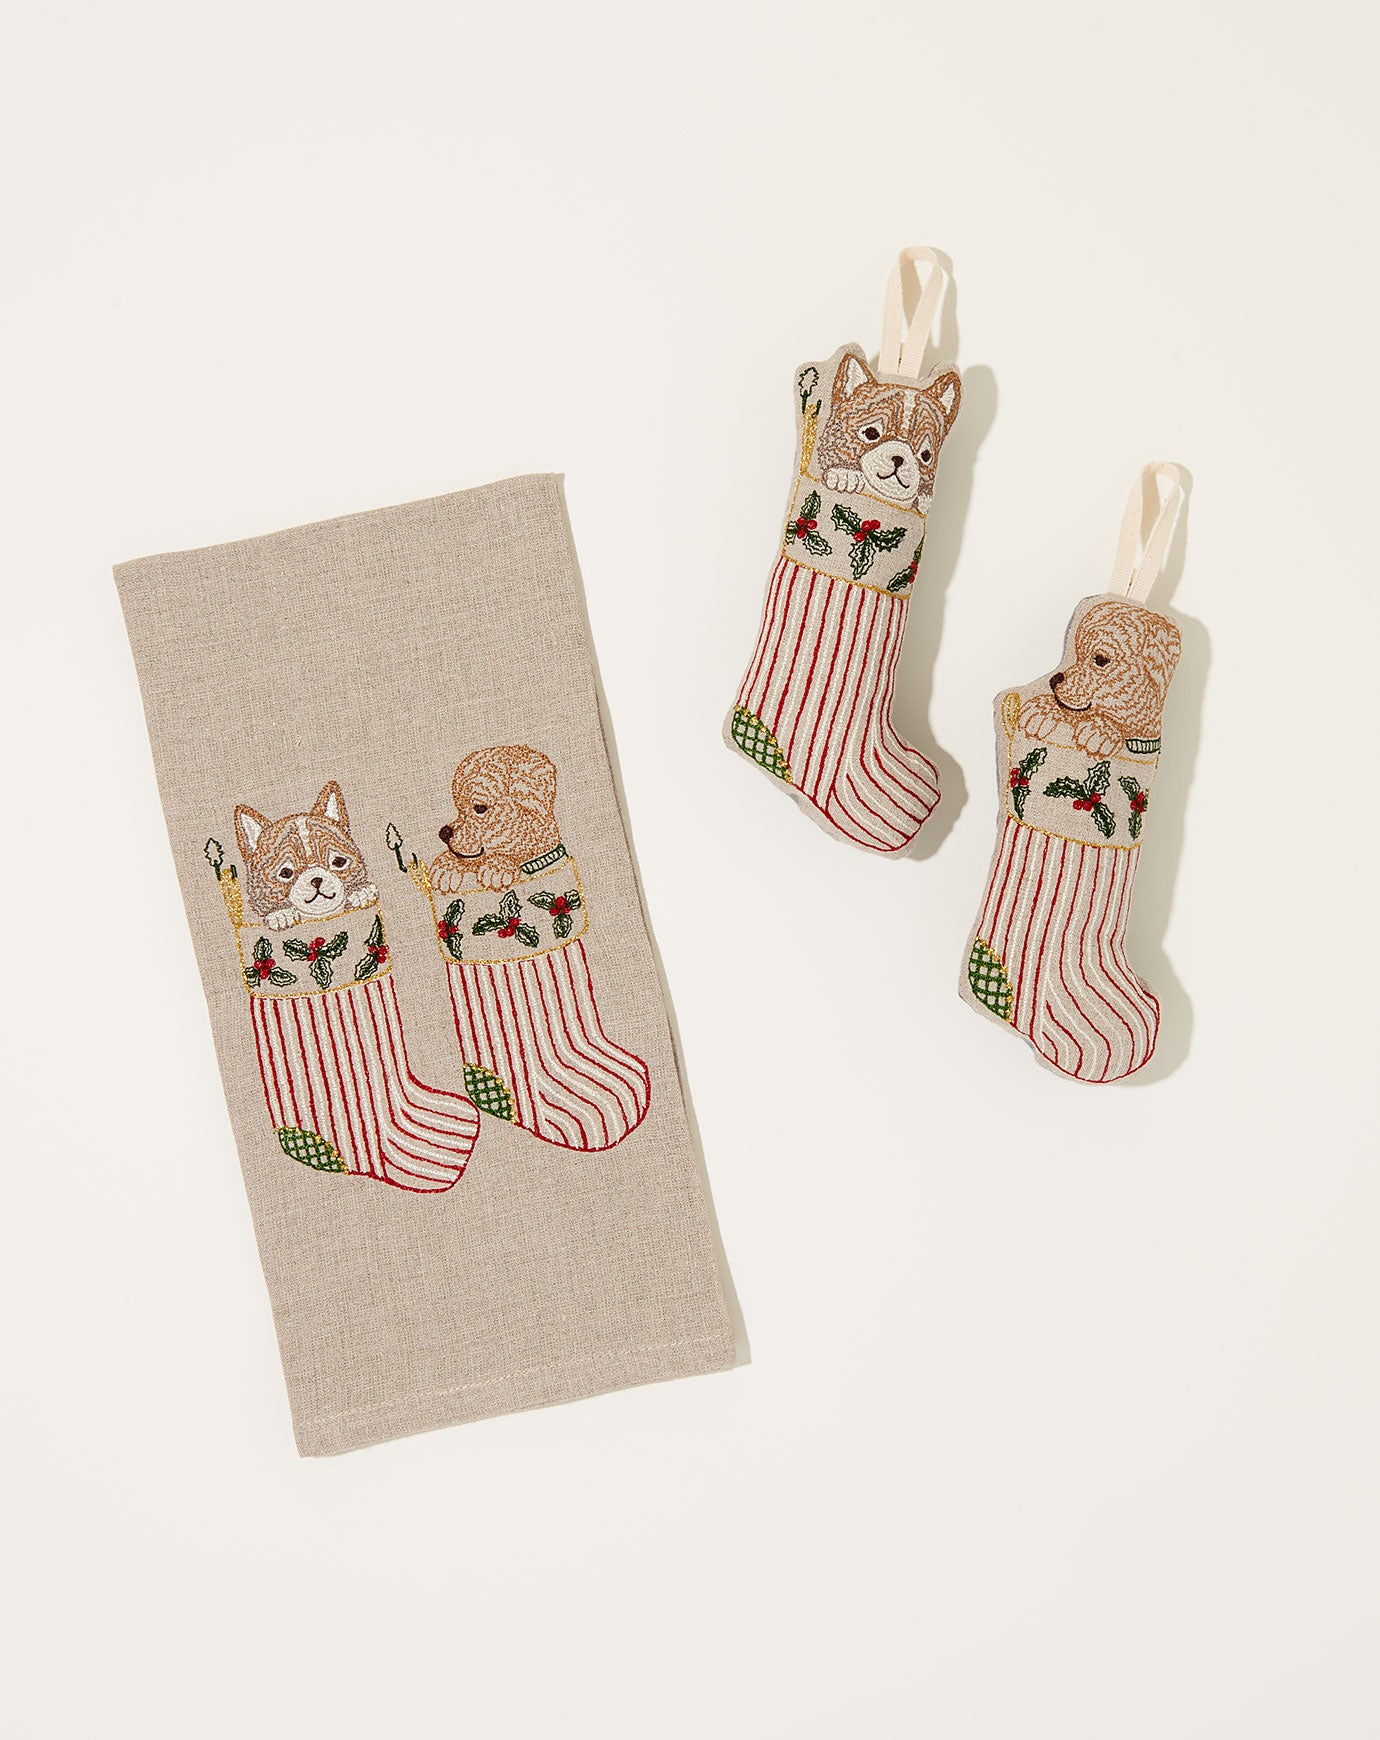 Coral & Tusk Kitty Stocking Ornament